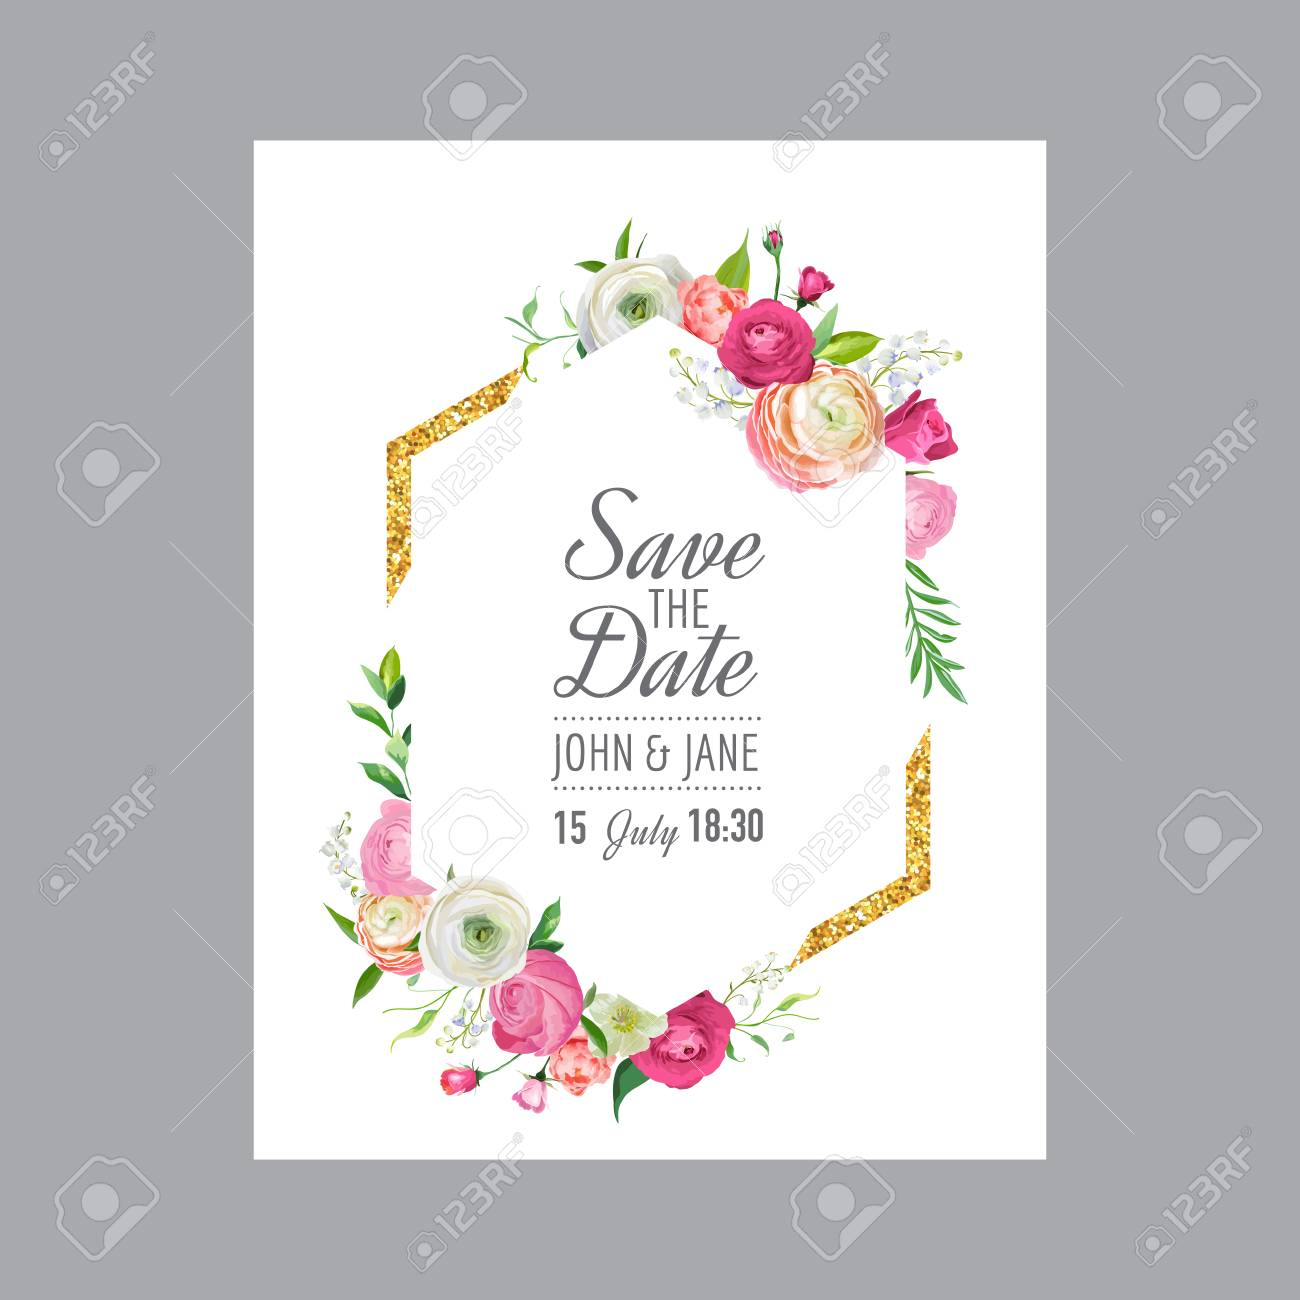 Save The Date Card Template With Gold Glitter Frame And Pink intended for dimensions 1300 X 1300